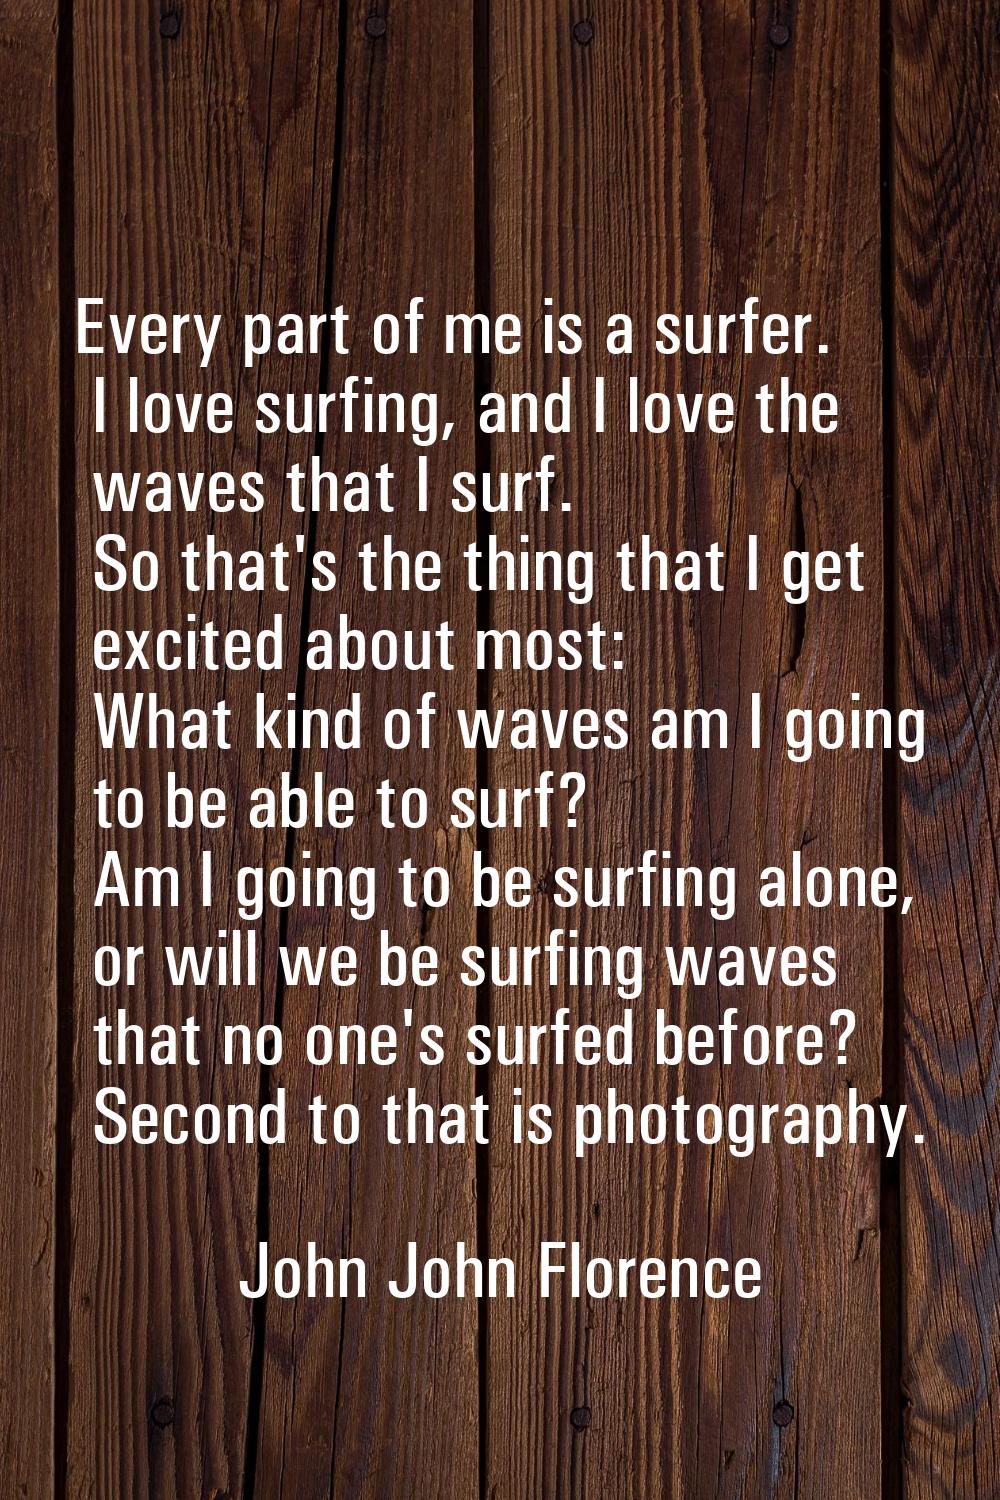 Every part of me is a surfer. I love surfing, and I love the waves that I surf. So that's the thing